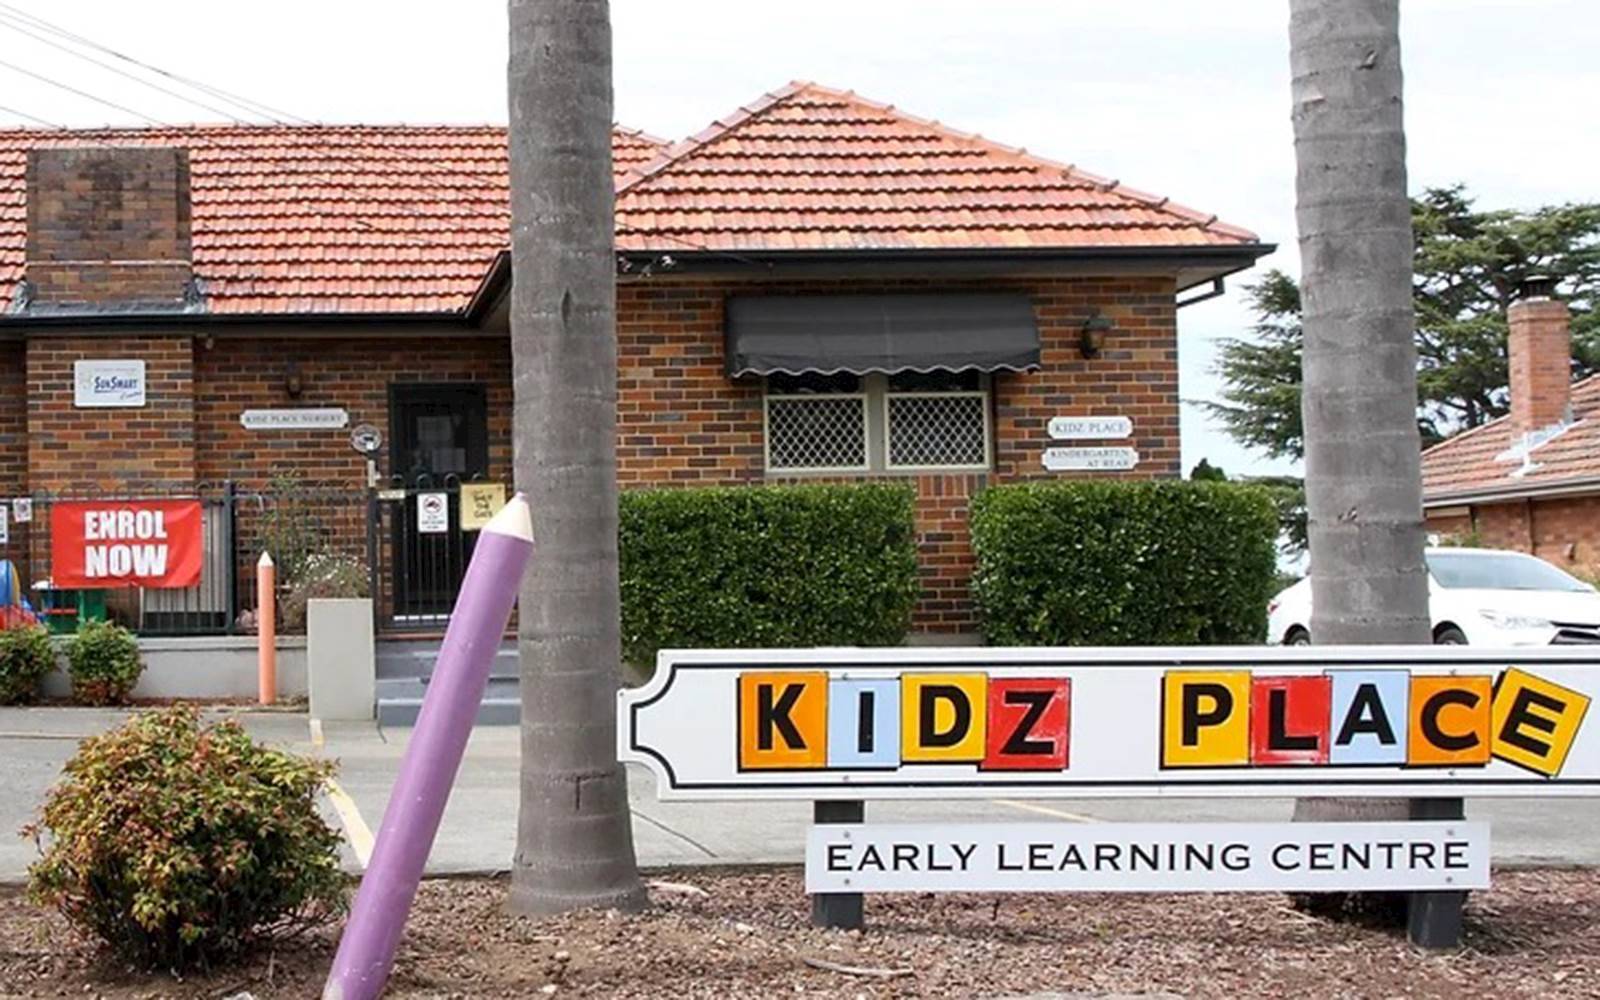 Kidz Place Early Learning Centre